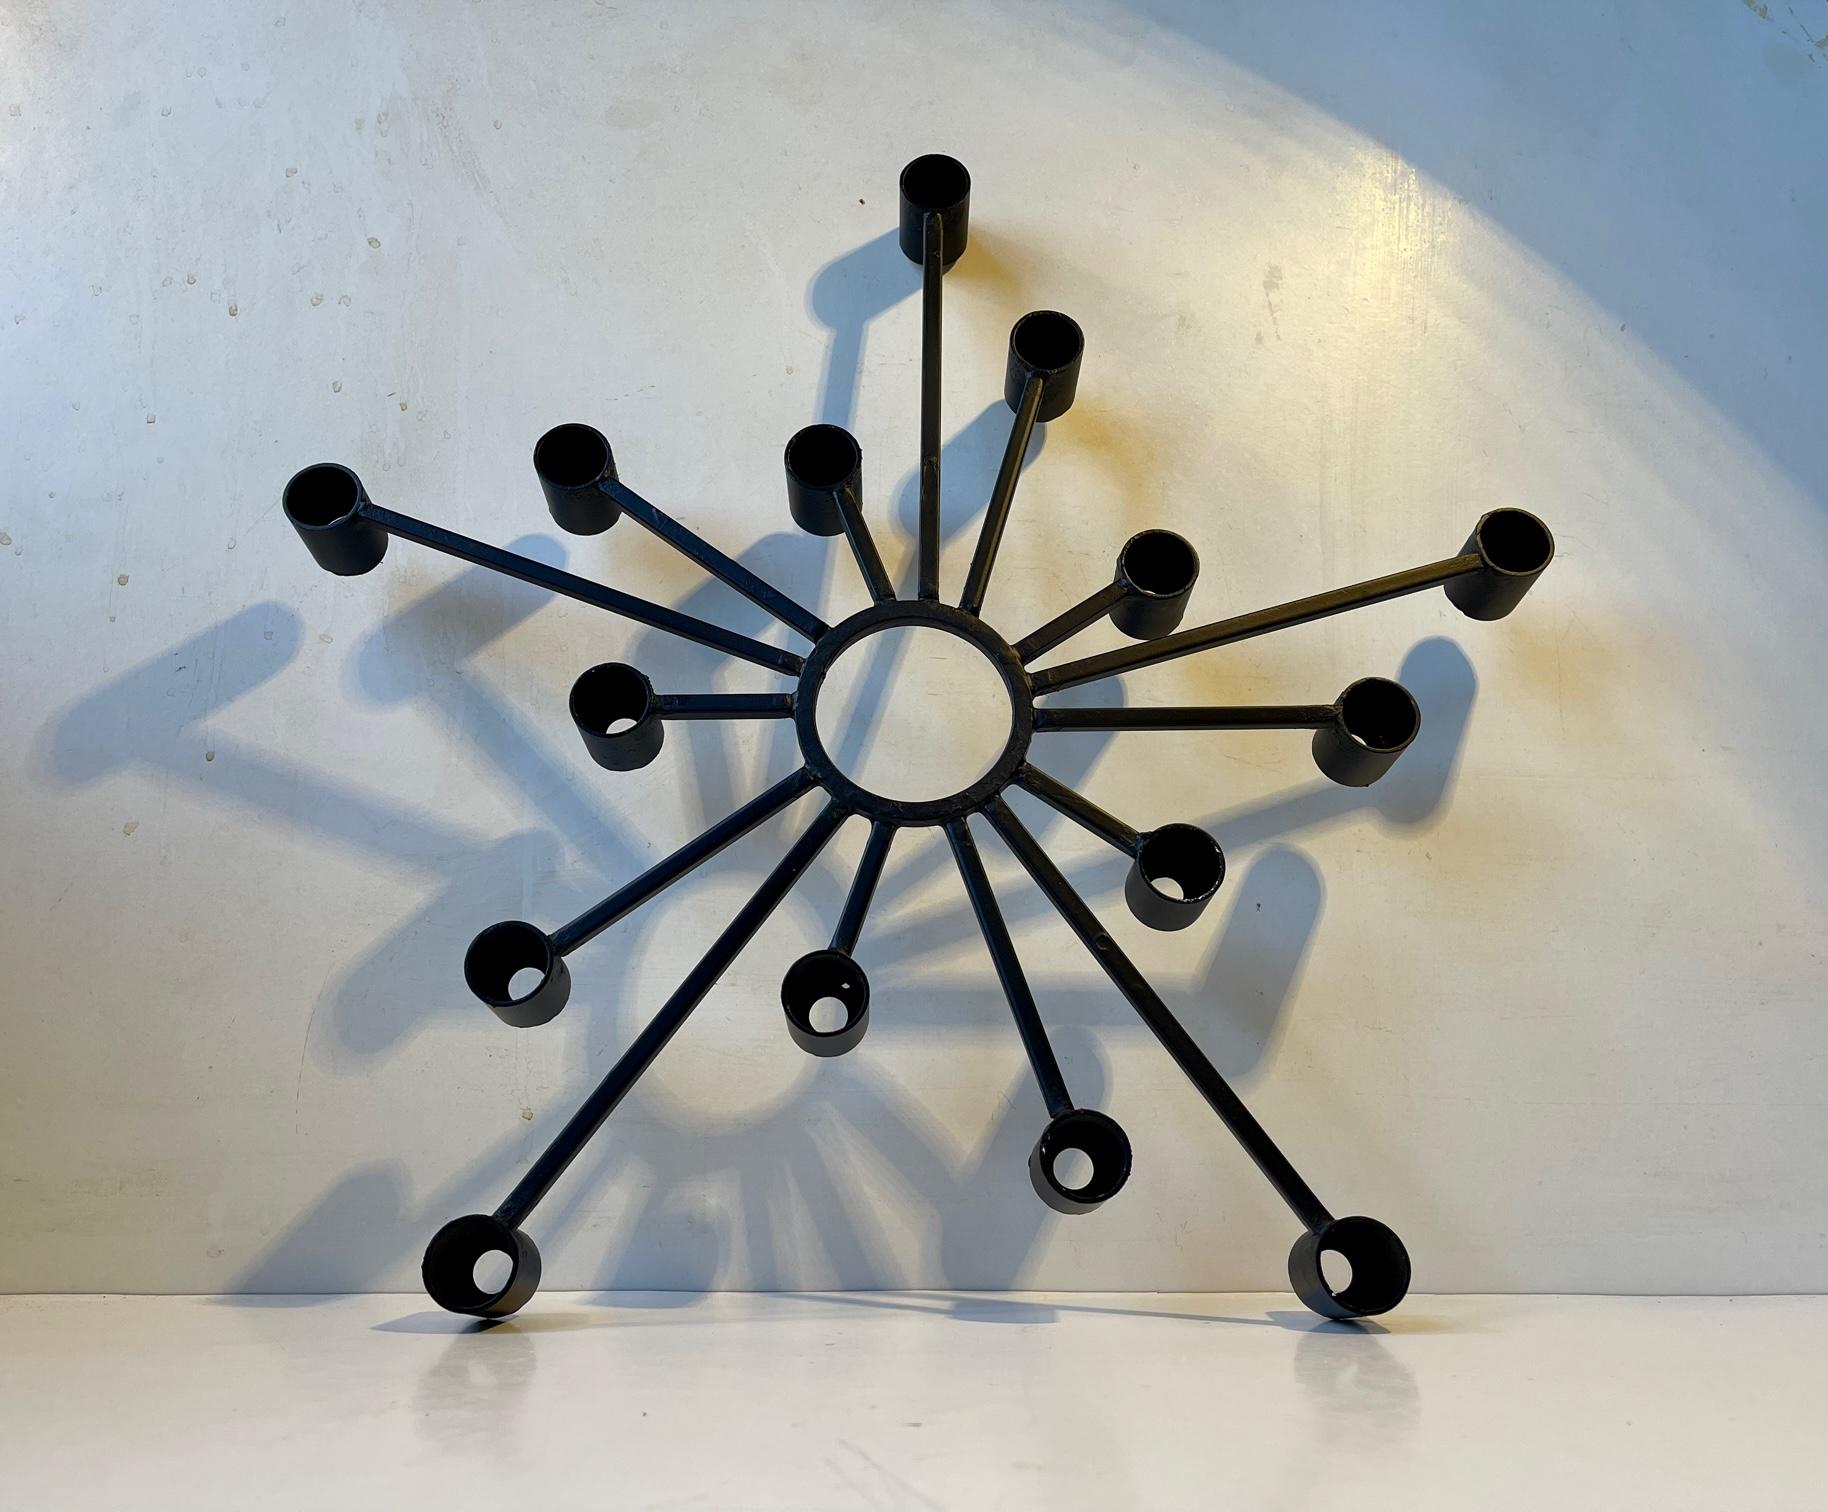 Large 1970s Brutalist - sculptural iron candleholder for up to 15 regular sized candles. Made in Denmark by the metal-art design company Dantoft kunstartikler (trans.: art objects). It is made from black lacquered and welded iron set in a graphic